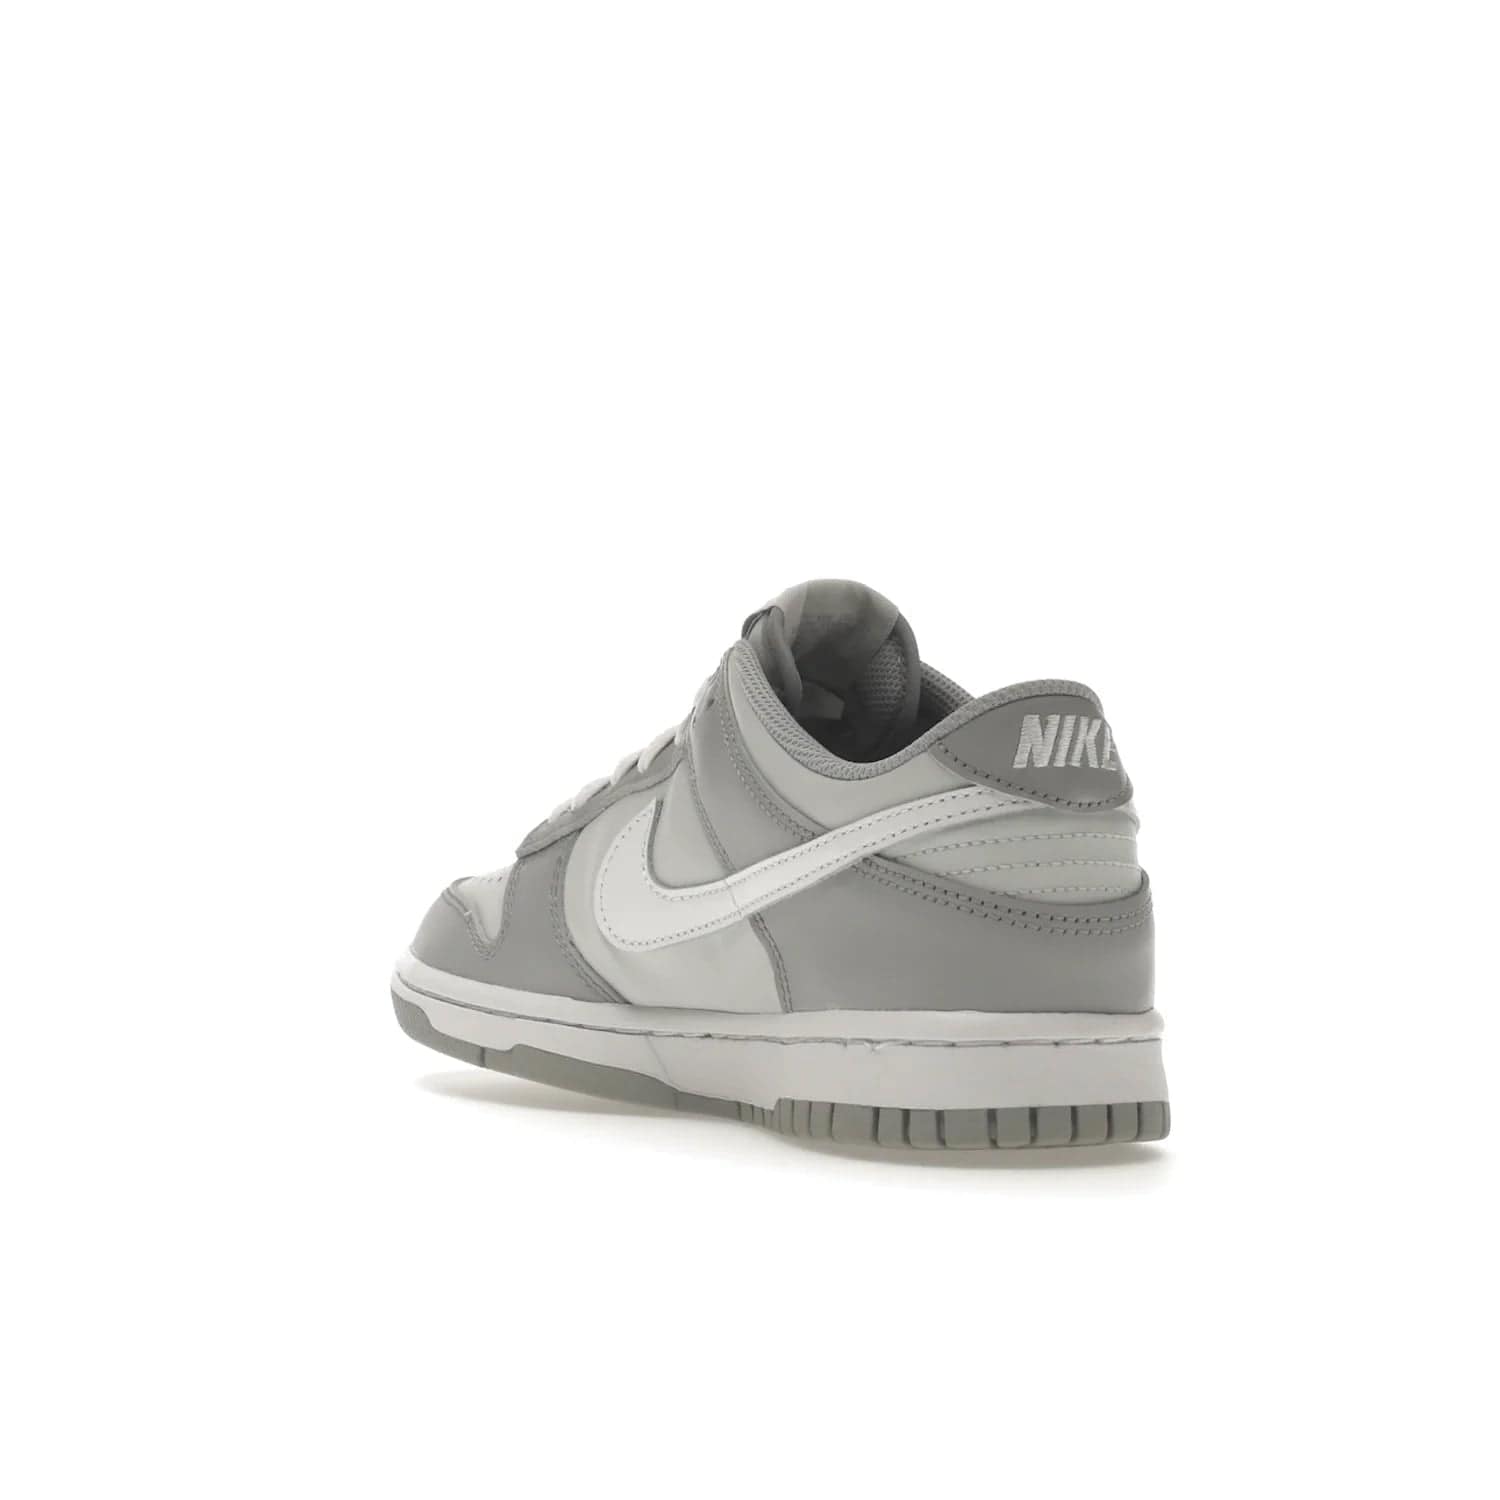 Nike Dunk Low Two-Toned Grey (GS) - Image 25 - Only at www.BallersClubKickz.com - Stylish Nike Dunk Low GS Two-Toned Grey featuring leather build, light/dark grey shades, white Swoosh logo & gray rubber outsole. Get ready to make a statement with this timeless classic released in March 2022.